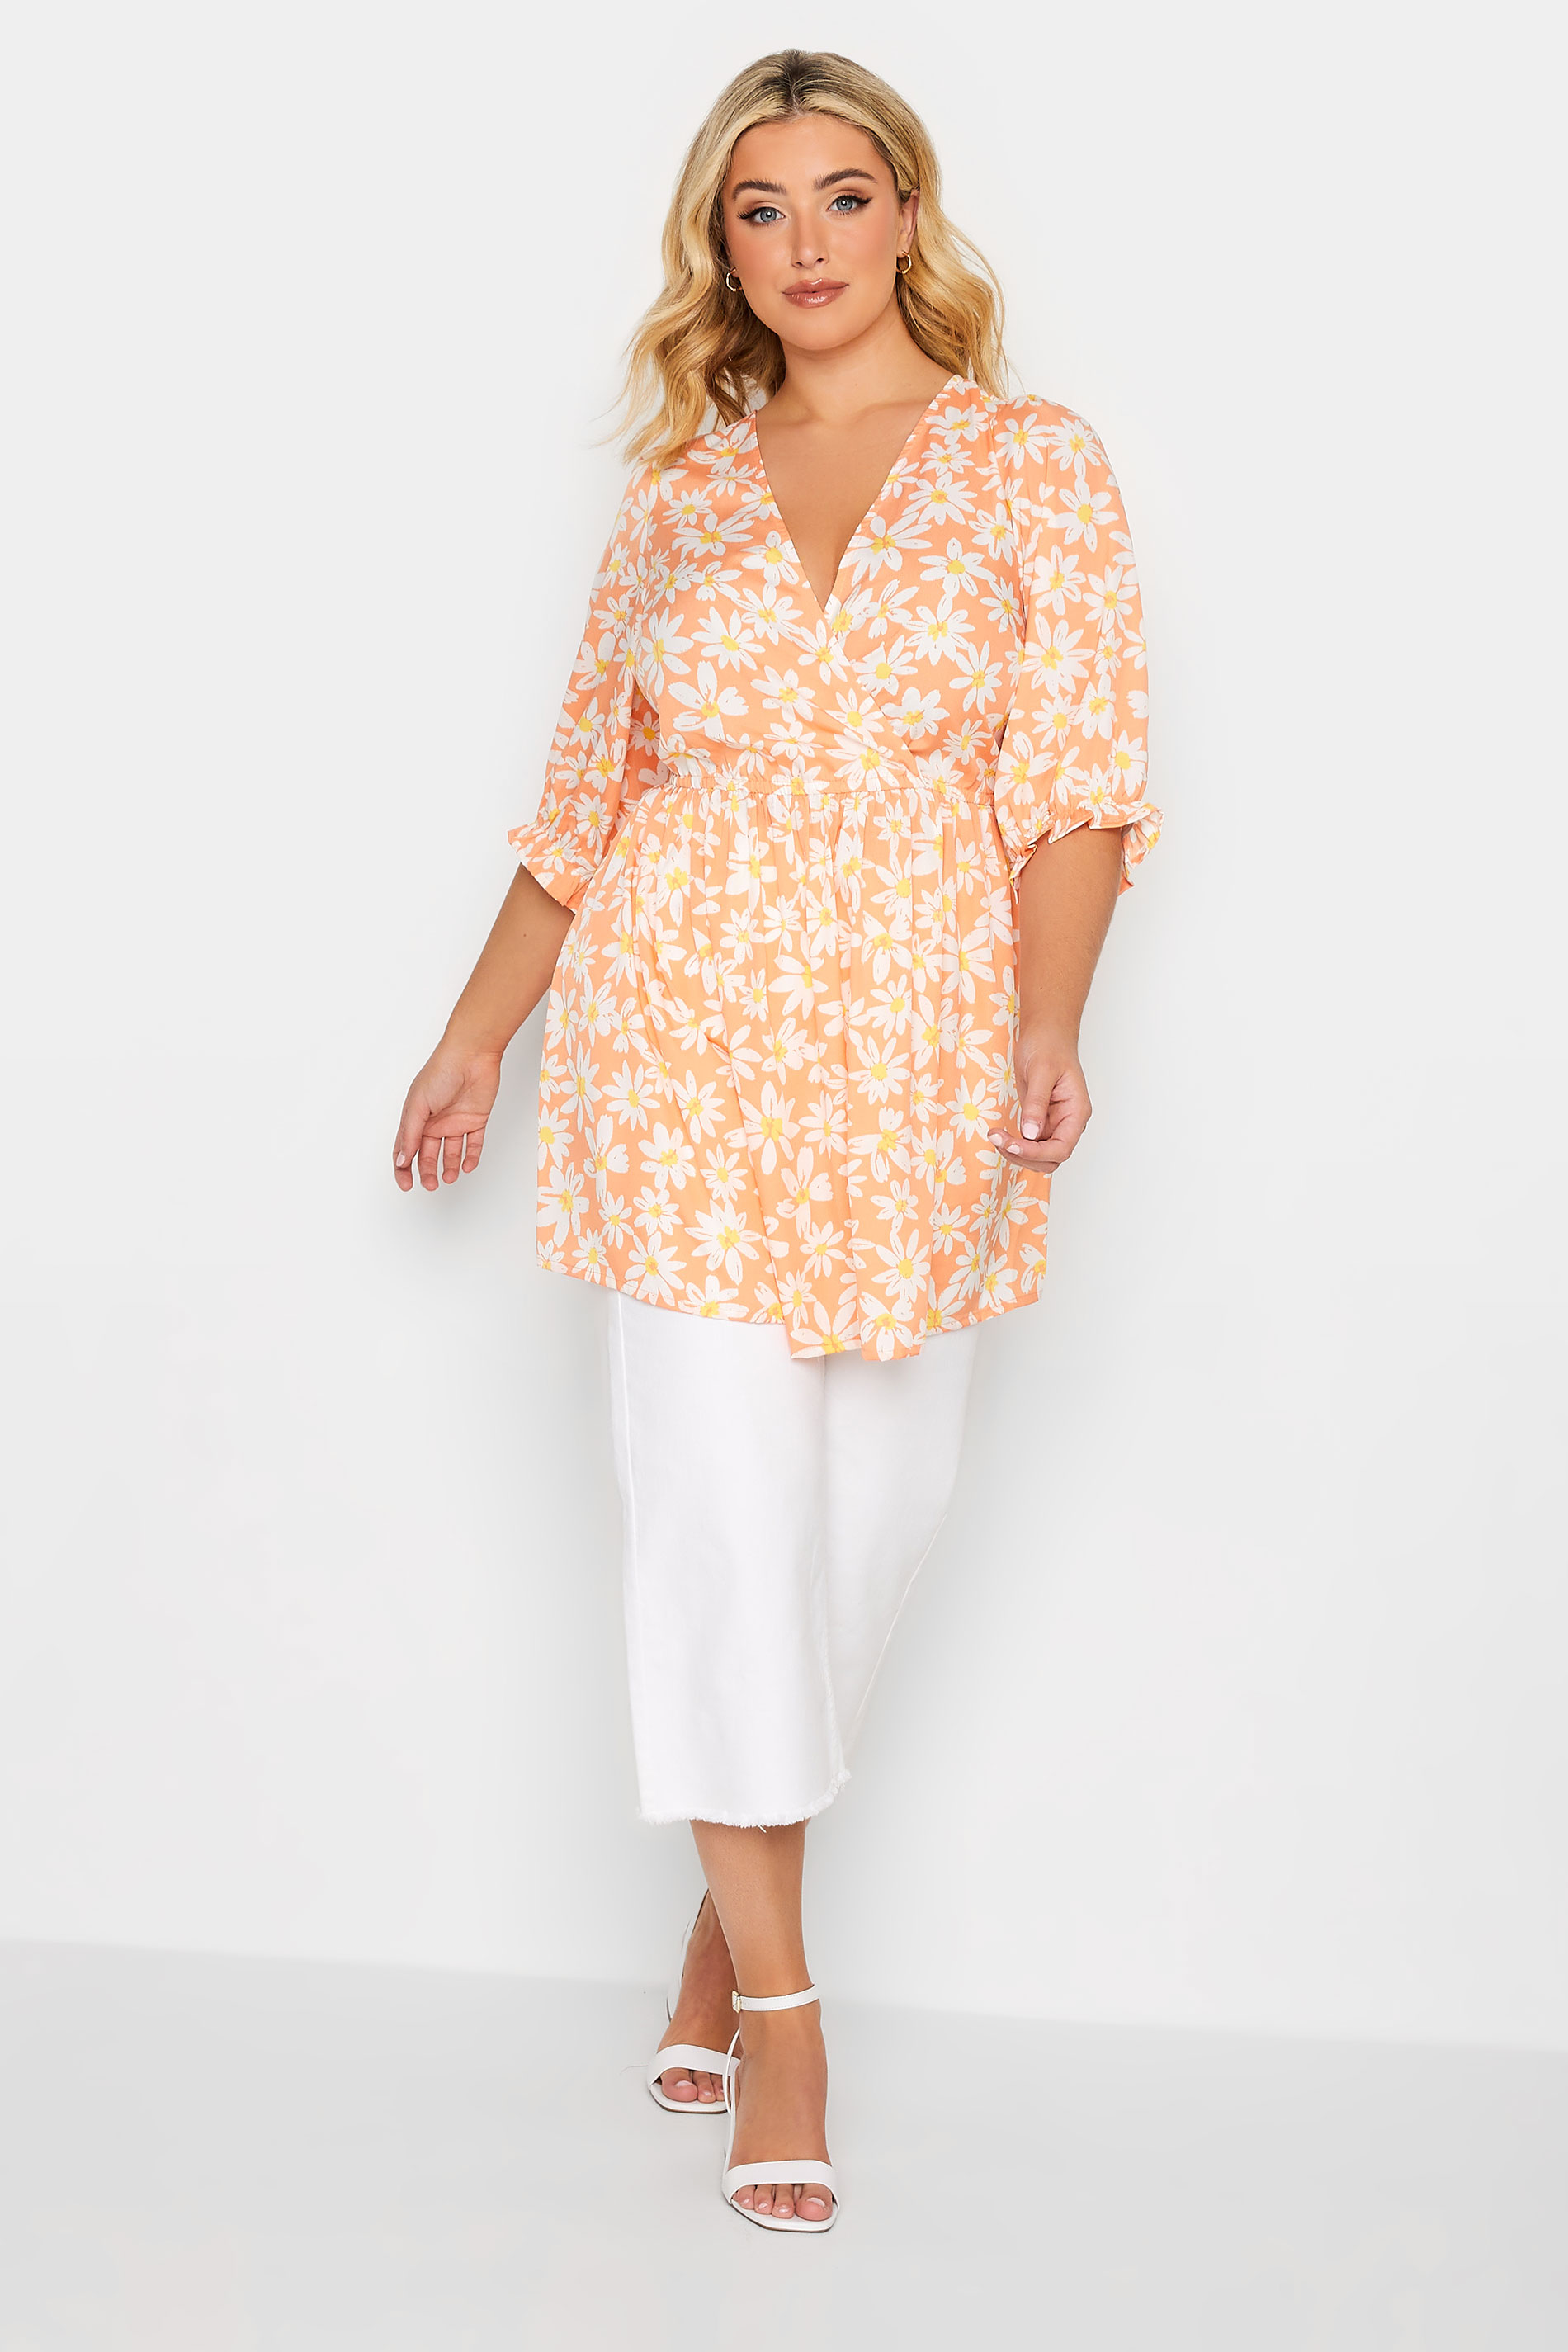 YOURS Plus Size Orange Floral Print Wrap Top | Yours Clothing 2